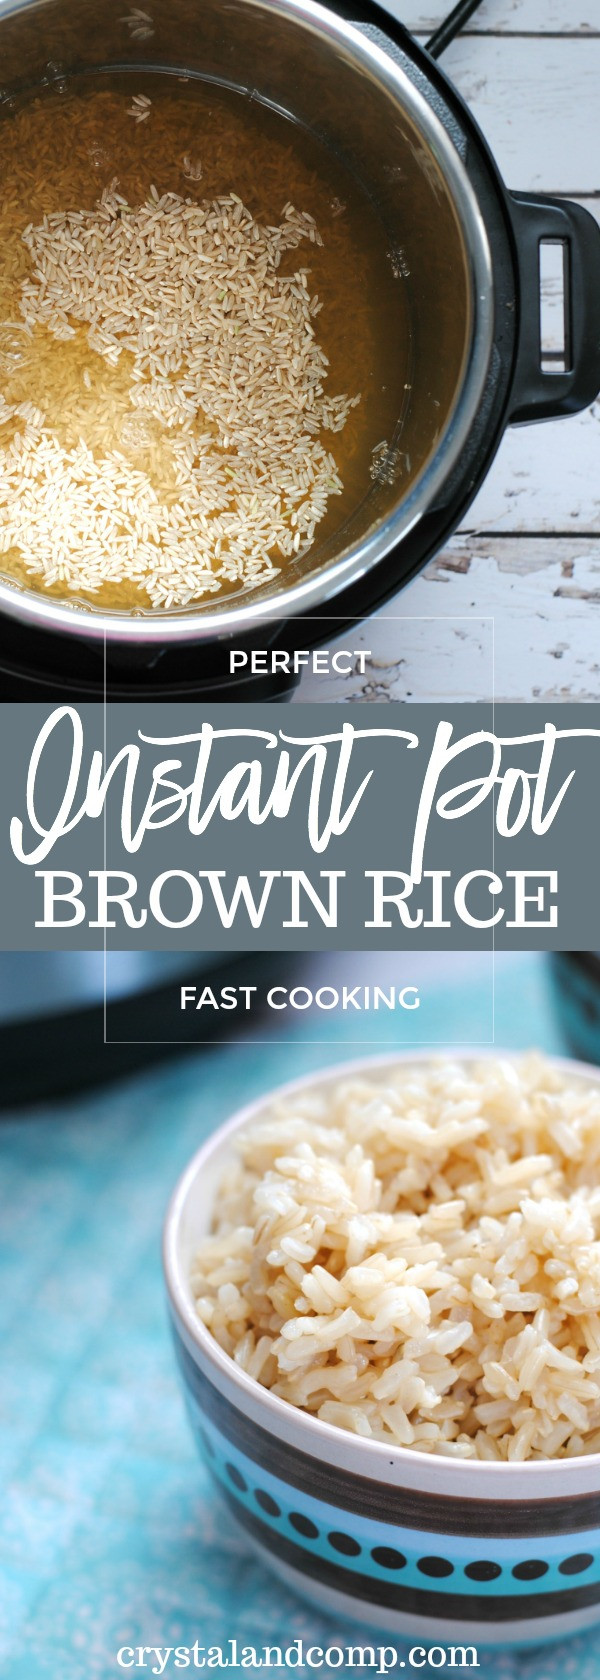 Instant Pot Long Grain Brown Rice
 How to Make Brown Rice in the Instant Pot